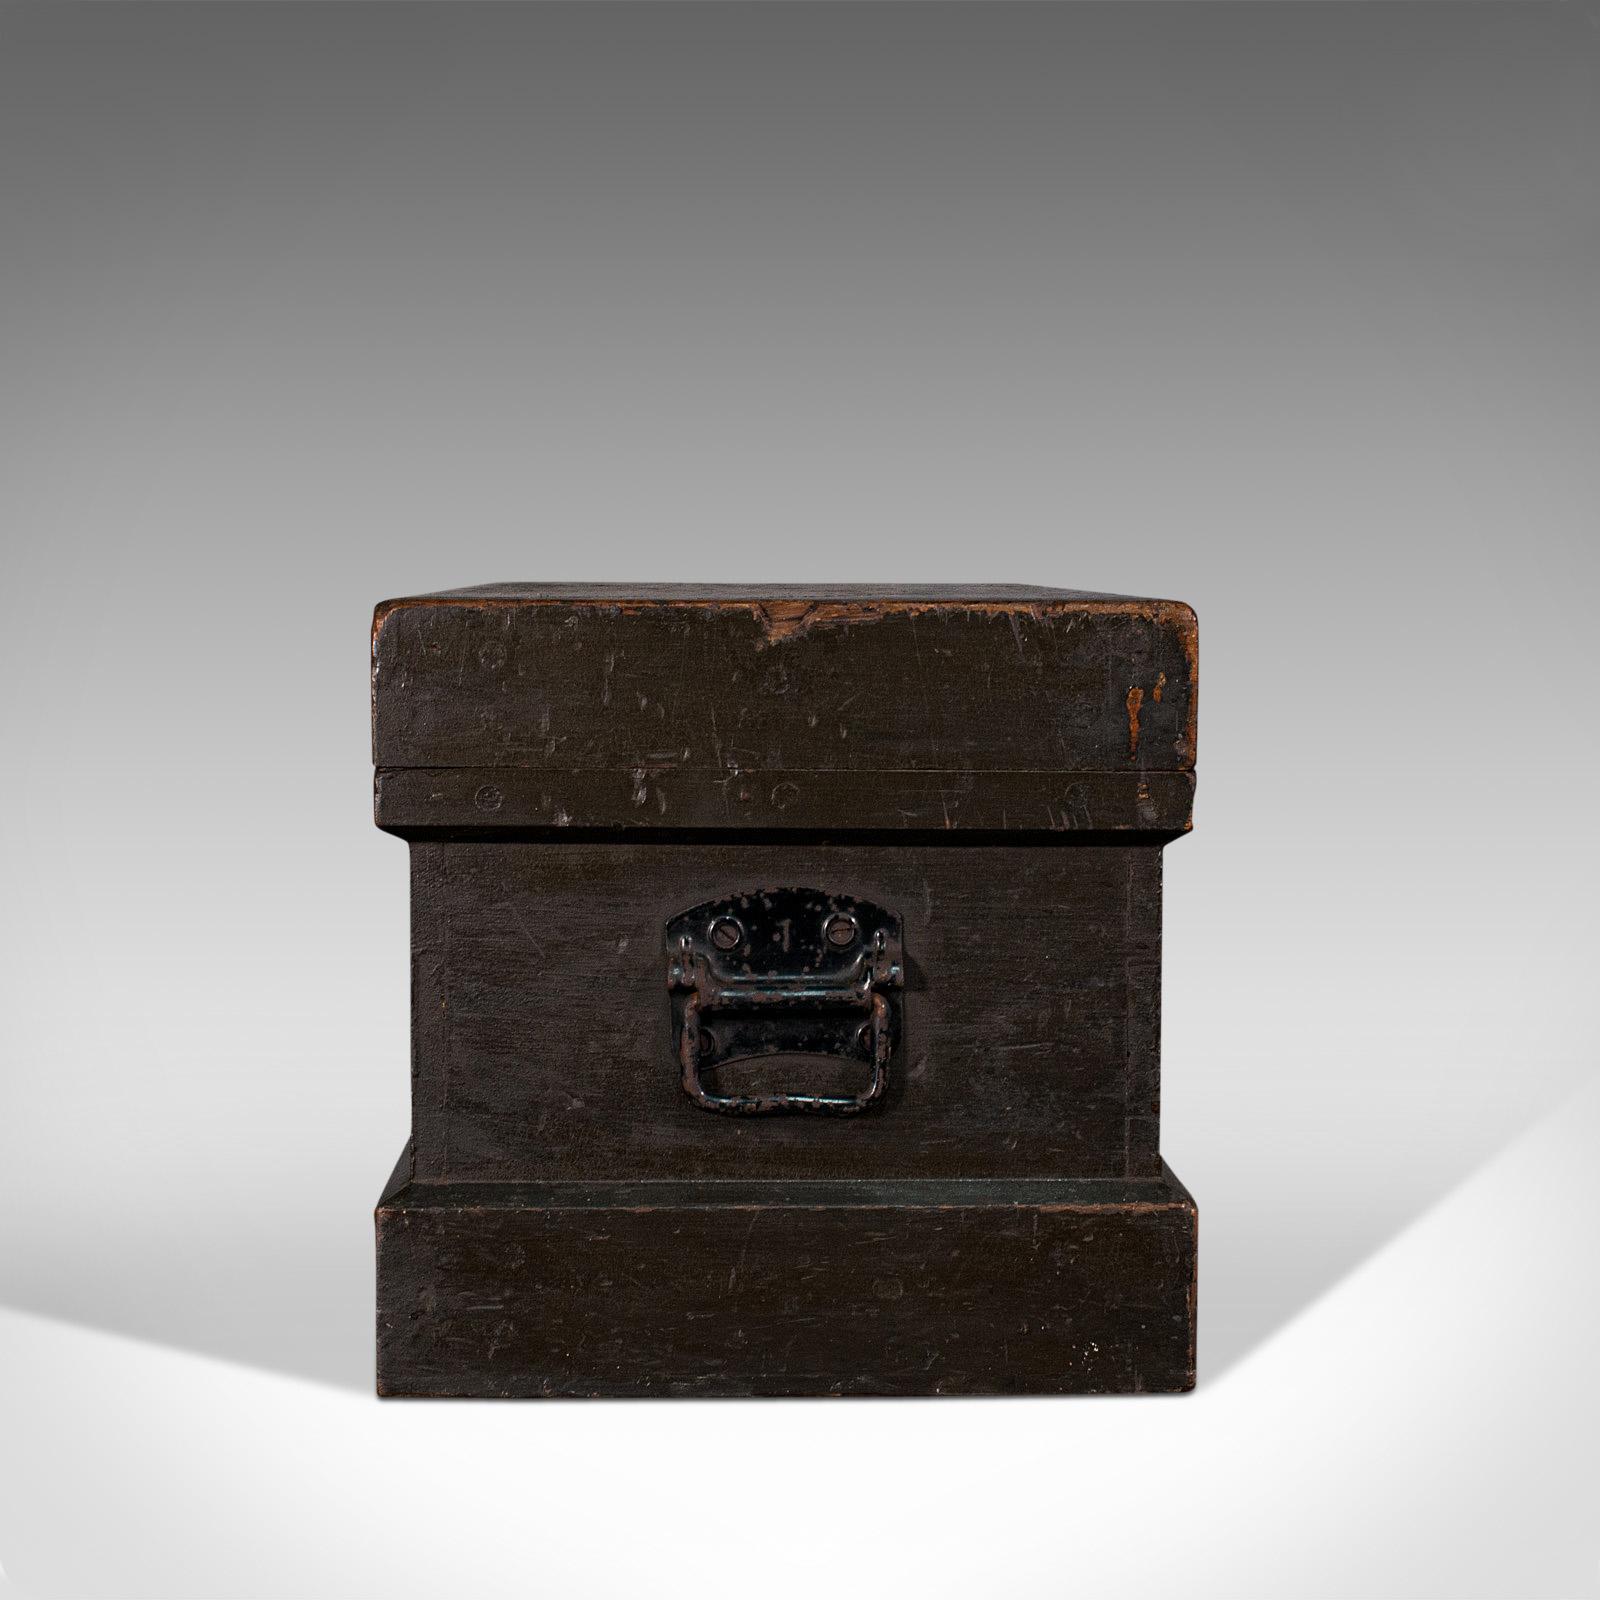 Late Victorian Antique Shipwright's Chest, English, Craftsman's Tool Trunk, Victorian, C.1900